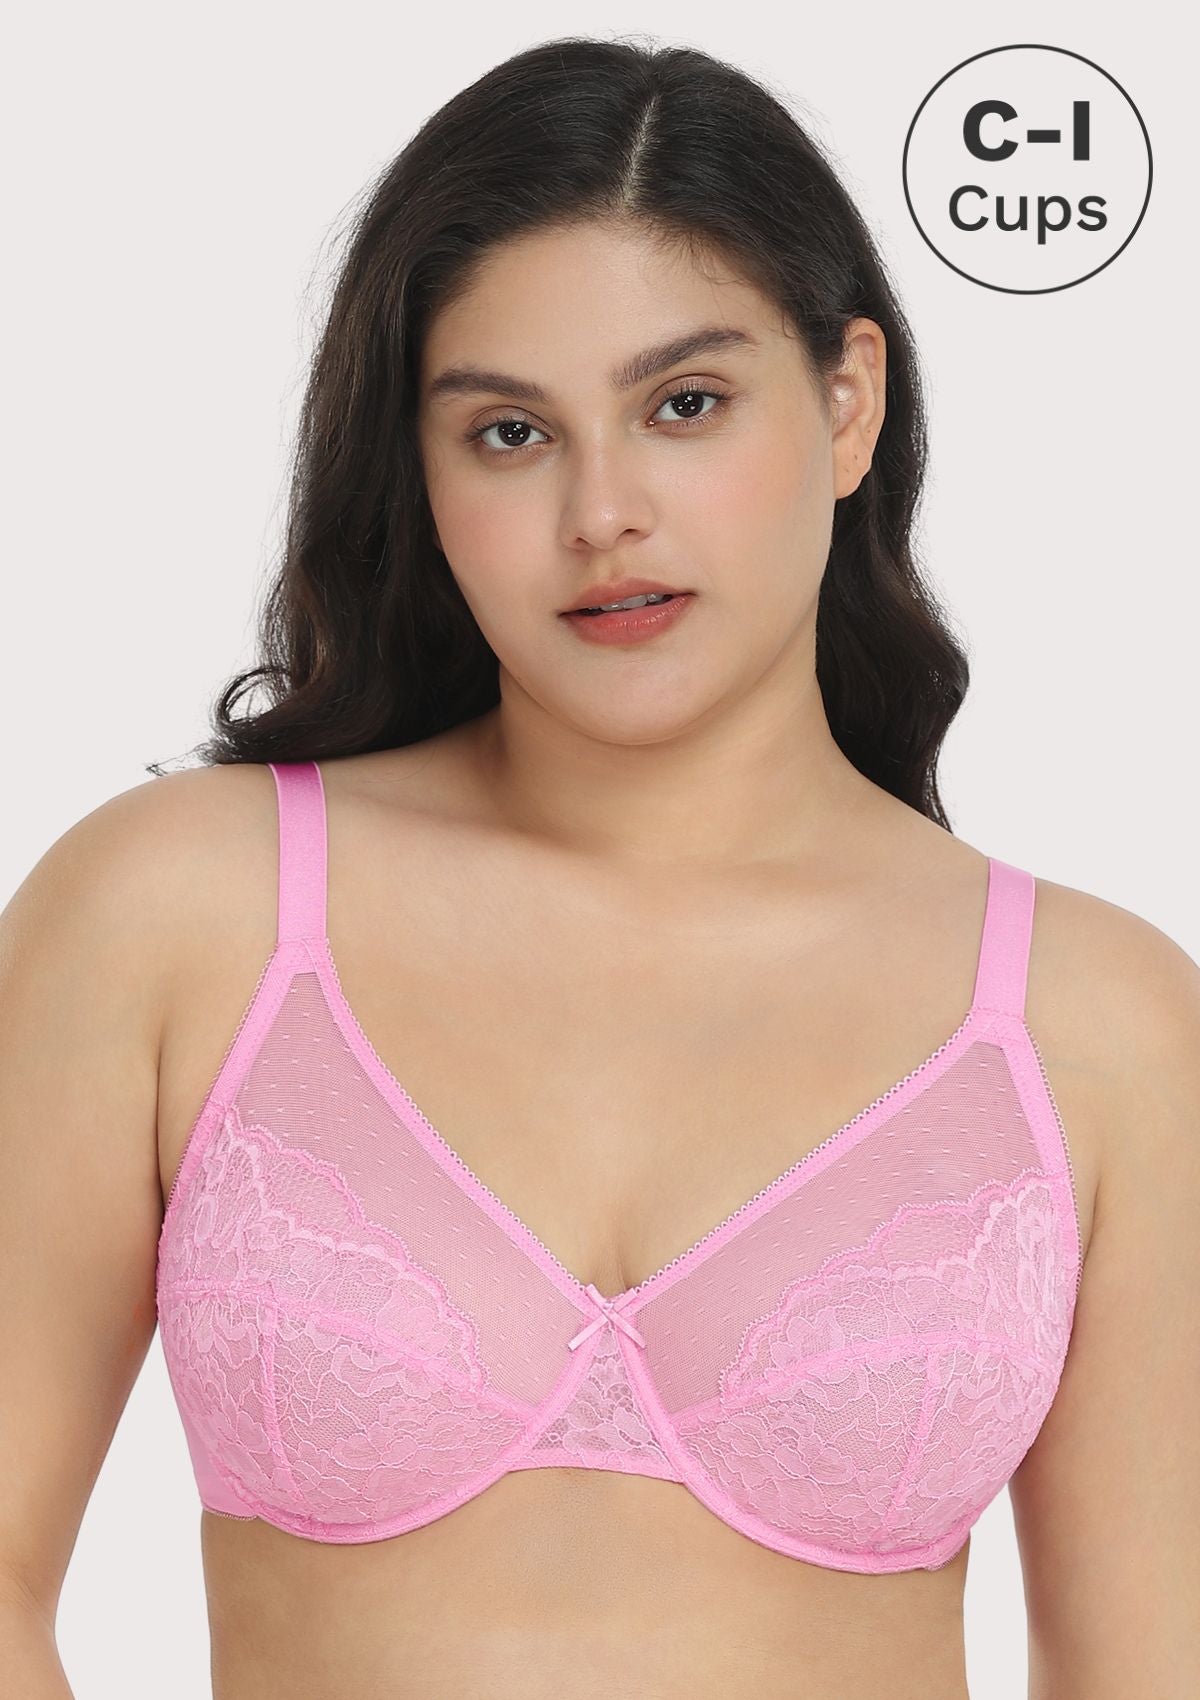 HSIA Enchante Lacy Bra: Comfy Sheer Lace Bra With Lift - Pink / 38 / G